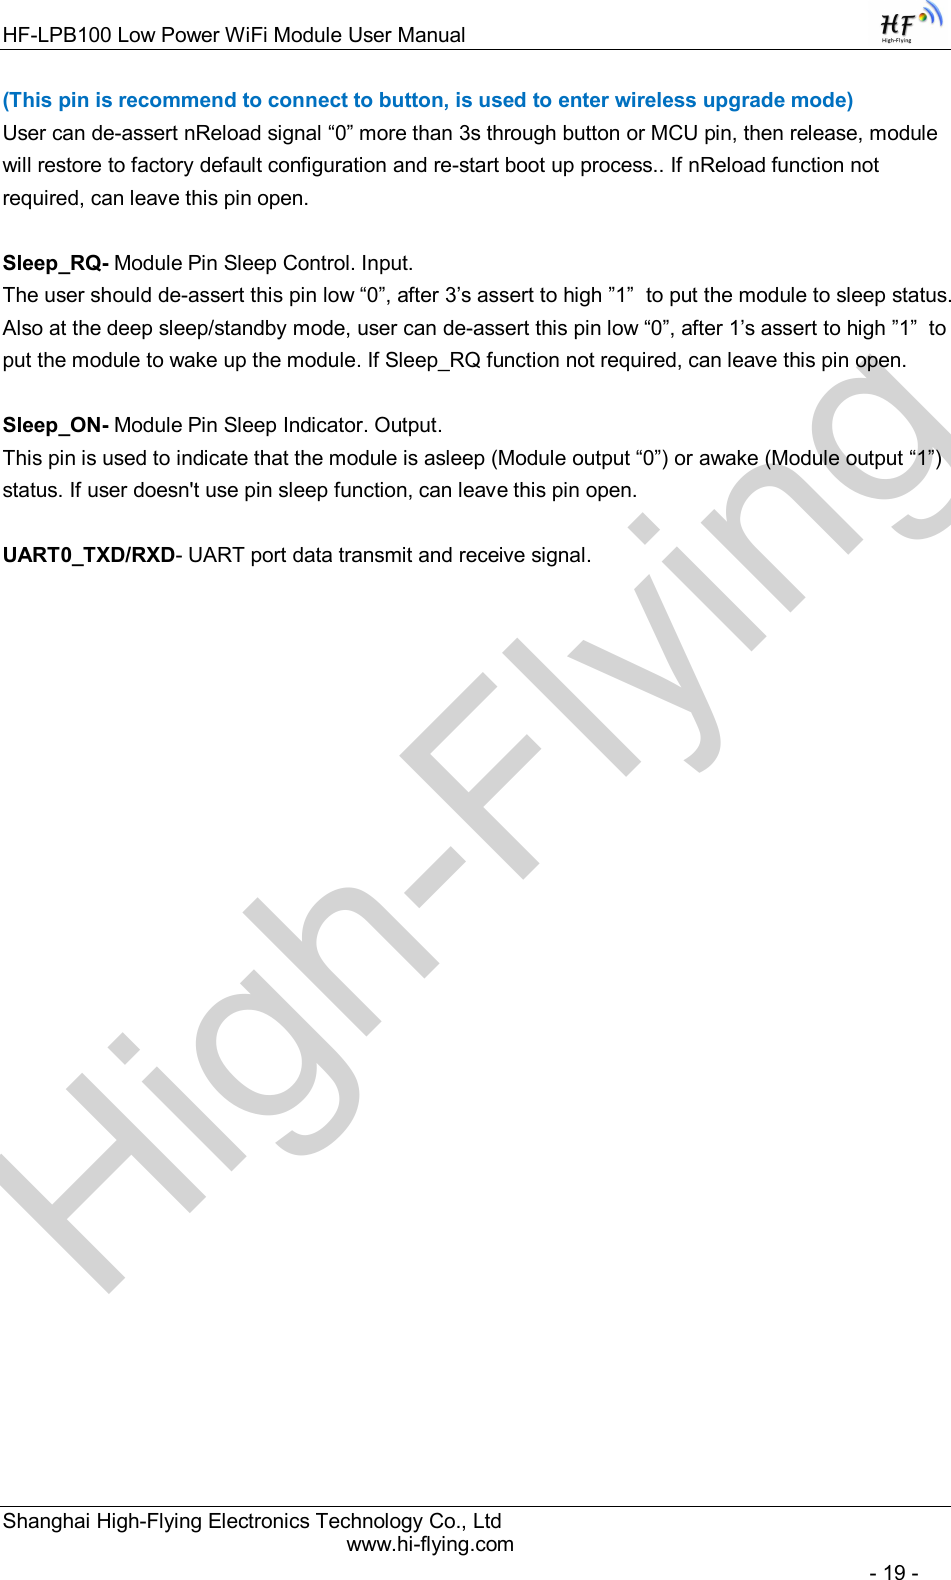 High-FlyingHF-LPB100 Low Power WiFi Module User Manual Shanghai High-Flying Electronics Technology Co., Ltd www.hi-flying.com   - 19 - (This pin is recommend to connect to button, is used to enter wireless upgrade mode) User can de-assert nReload signal “0” more than 3s through button or MCU pin, then release, module will restore to factory default configuration and re-start boot up process.. If nReload function not required, can leave this pin open.  Sleep_RQ- Module Pin Sleep Control. Input.  The user should de-assert this pin low “0”, after 3’s assert to high ”1”  to put the module to sleep status. Also at the deep sleep/standby mode, user can de-assert this pin low “0”, after 1’s assert to high ”1”  to put the module to wake up the module. If Sleep_RQ function not required, can leave this pin open.  Sleep_ON- Module Pin Sleep Indicator. Output.  This pin is used to indicate that the module is asleep (Module output “0”) or awake (Module output “1”) status. If user doesn&apos;t use pin sleep function, can leave this pin open.  UART0_TXD/RXD- UART port data transmit and receive signal.                           